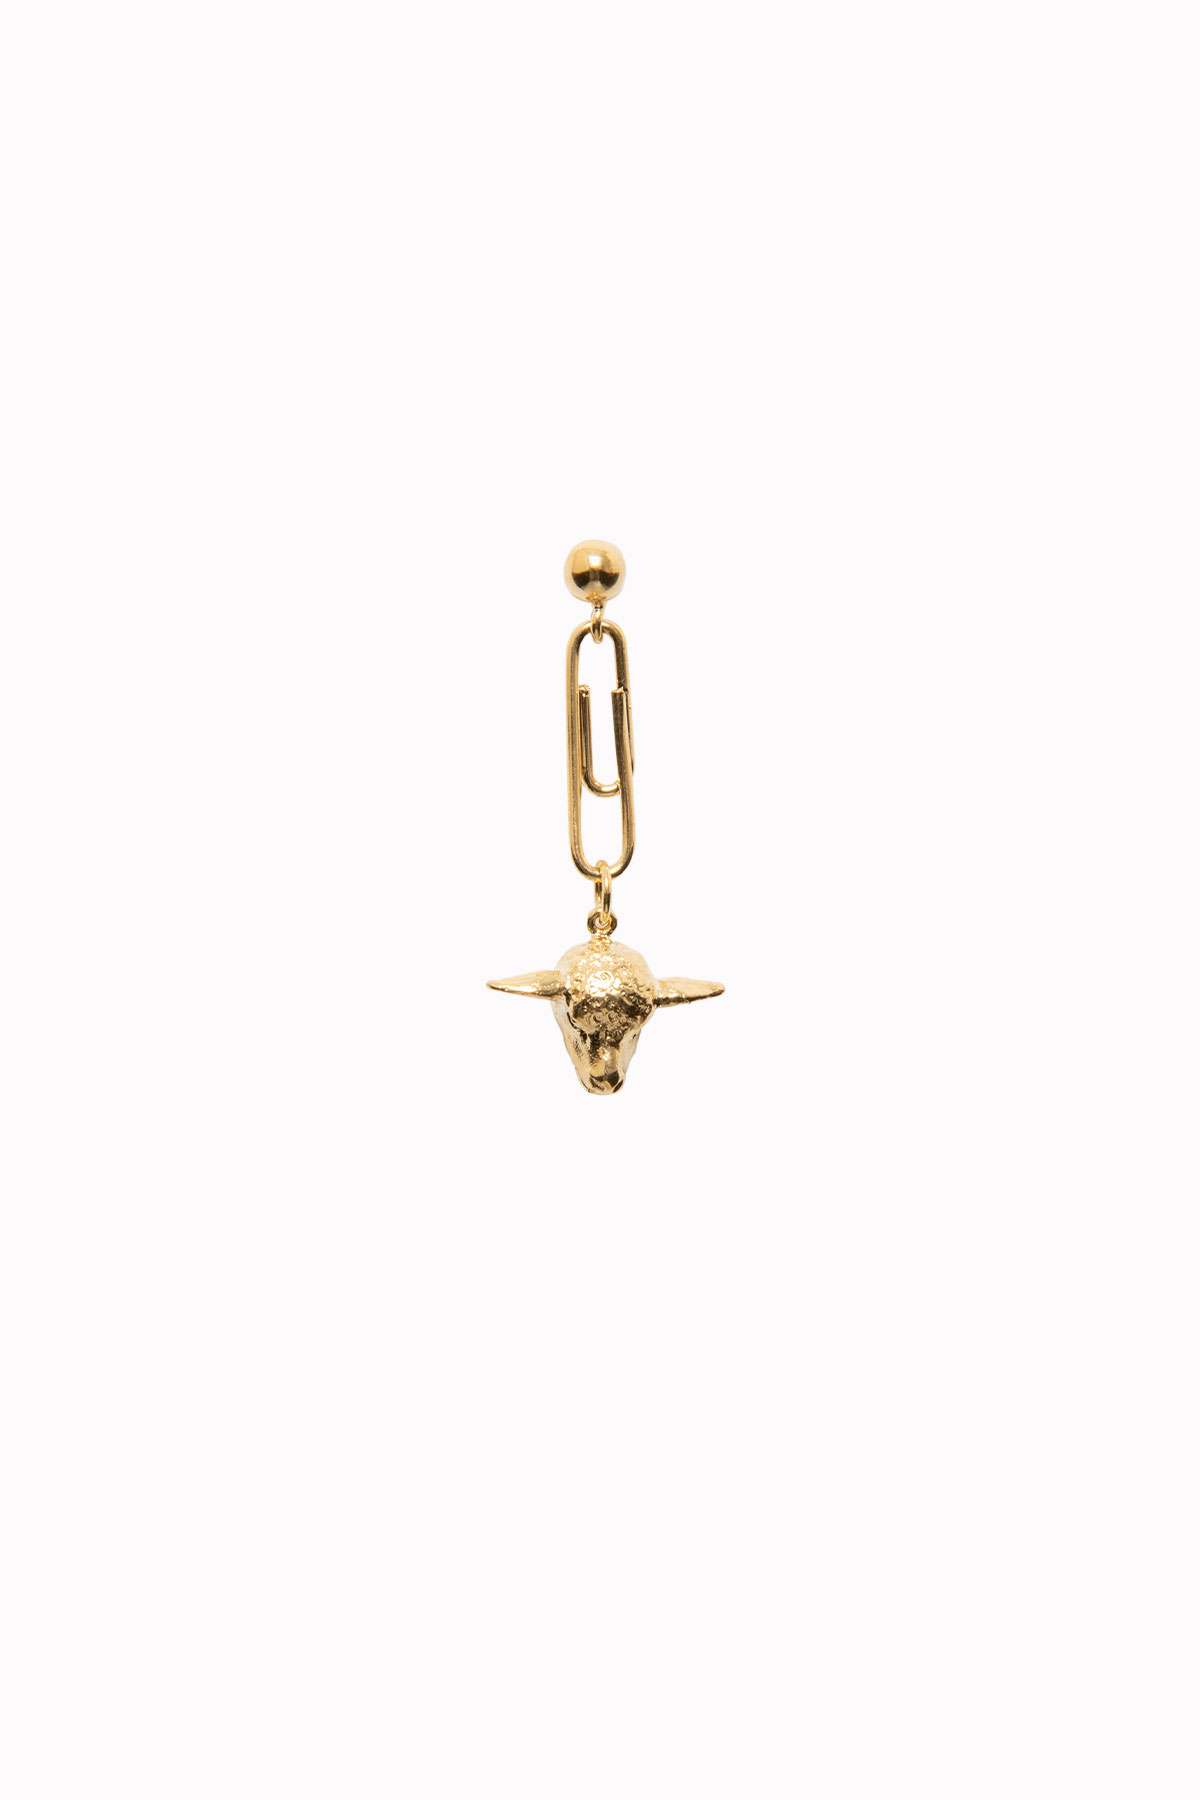 Ball, sheep’s head and clip earring